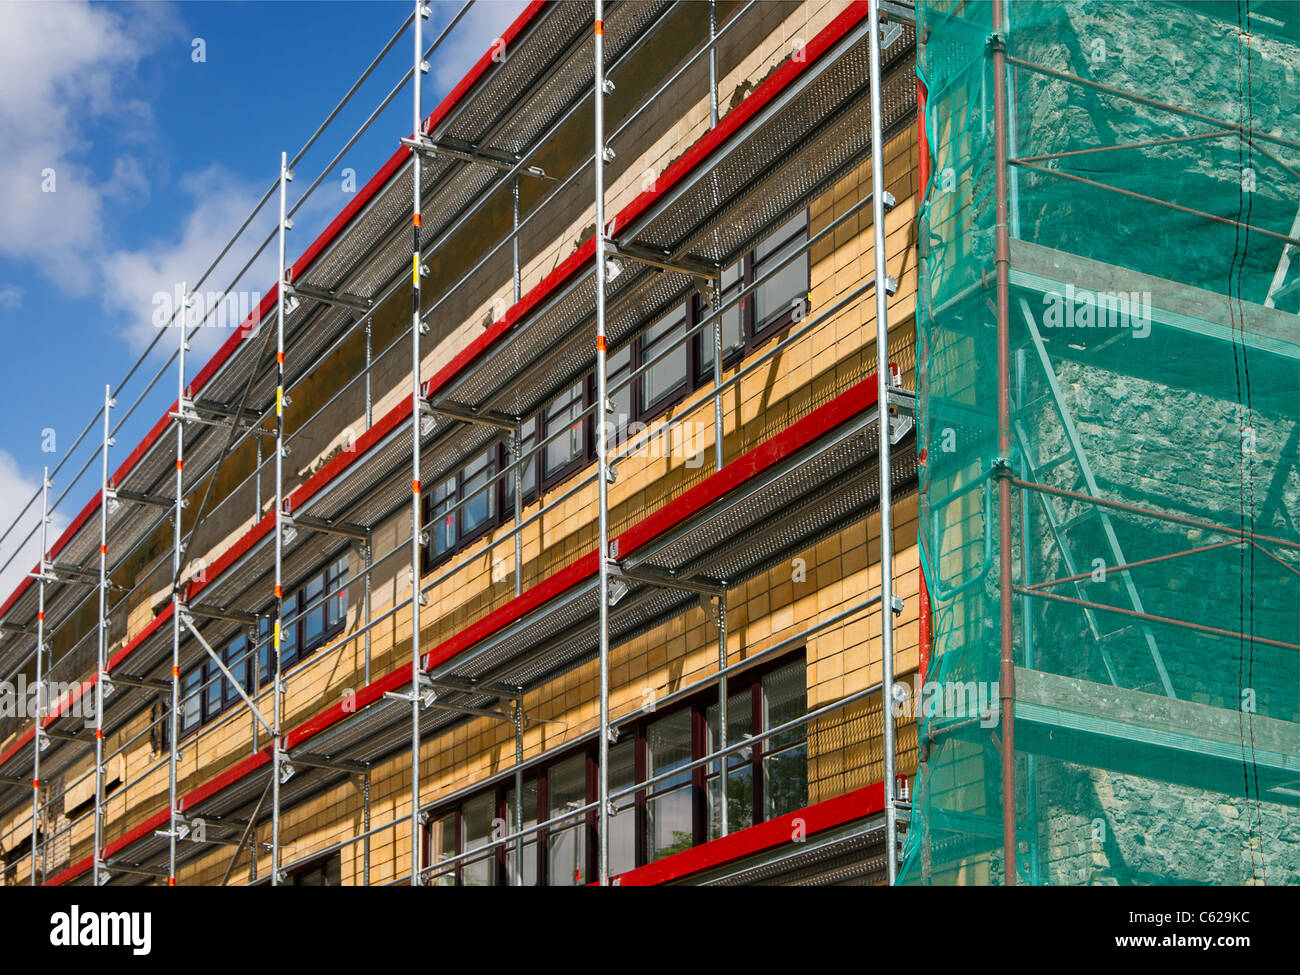 Corner view of a building with scaffolding enclosed in green safety fabric Stock Photo